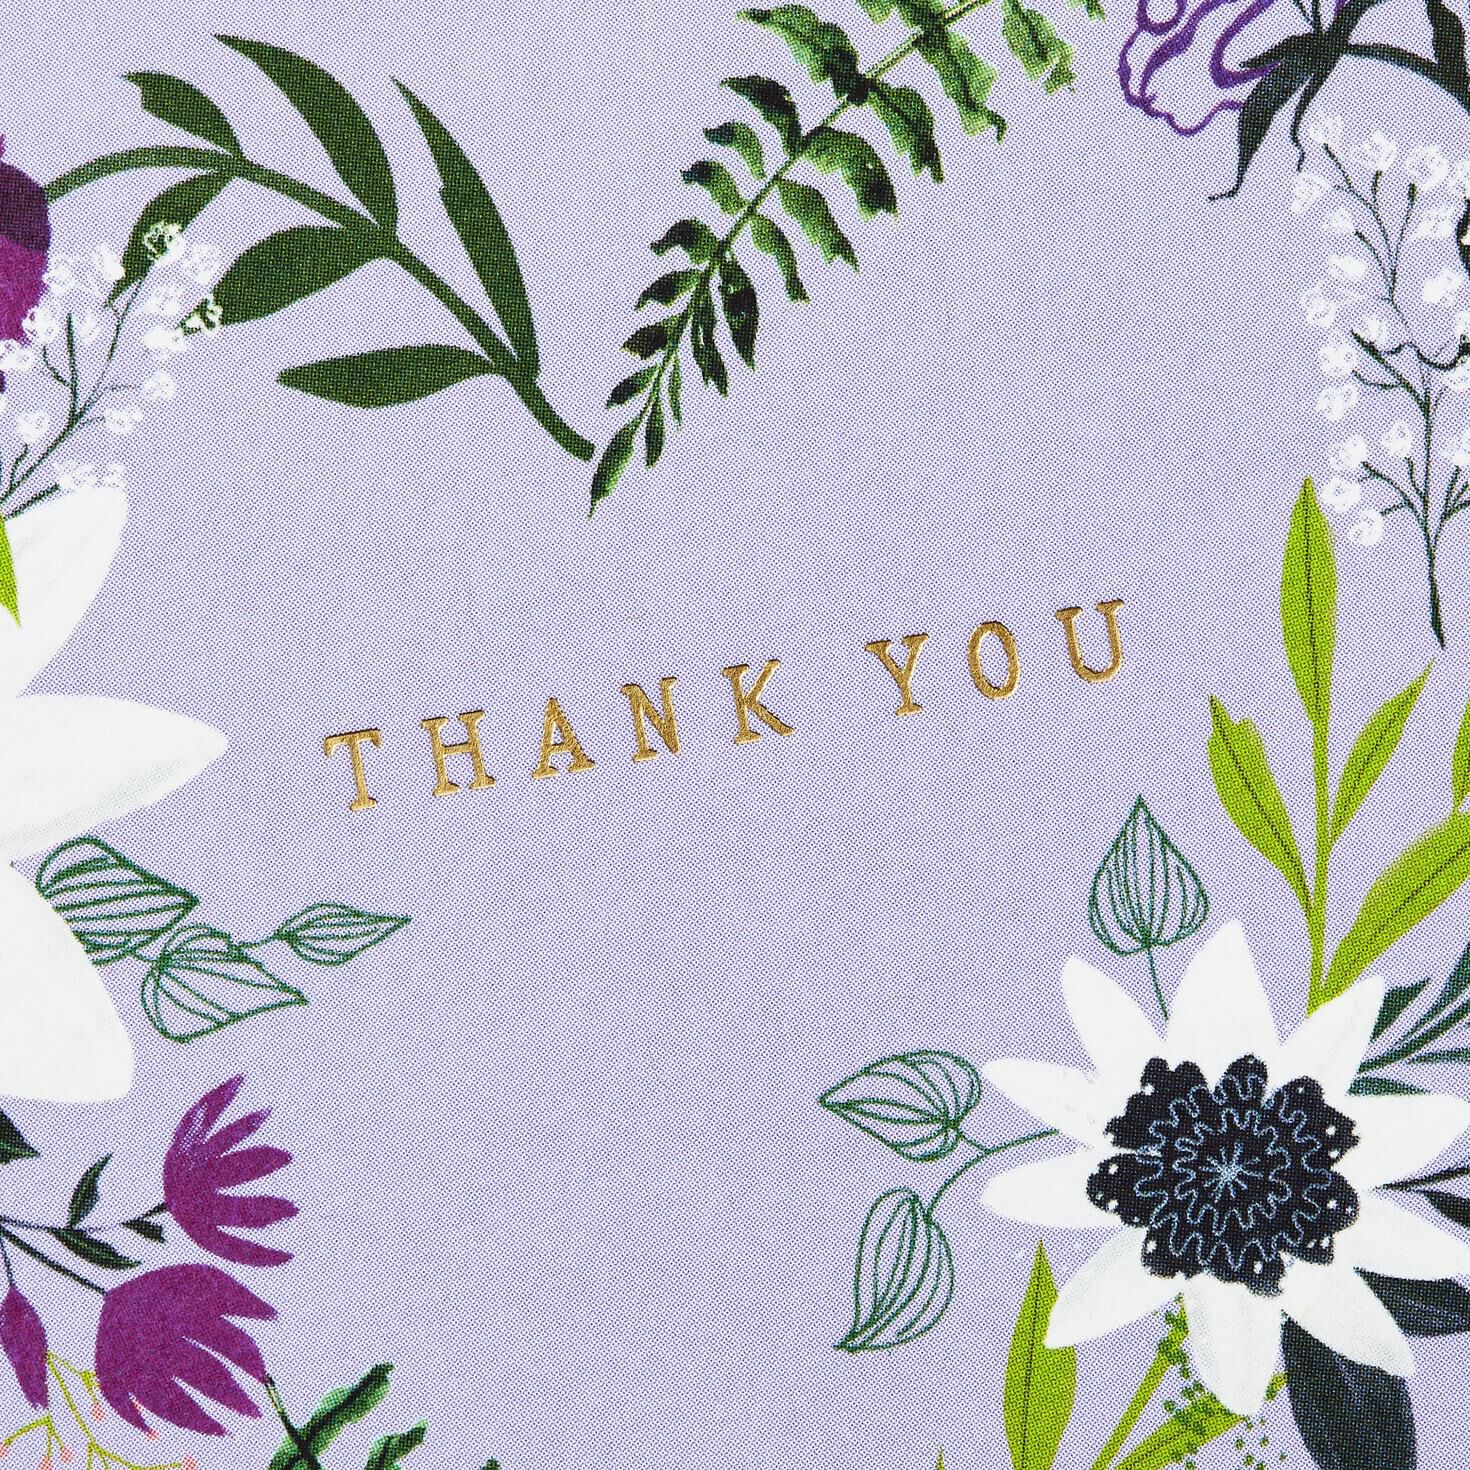 Floral Heart Wreath on Lavender Blank Thank You Notes, Pack of 10 for only USD 11.99 | Hallmark